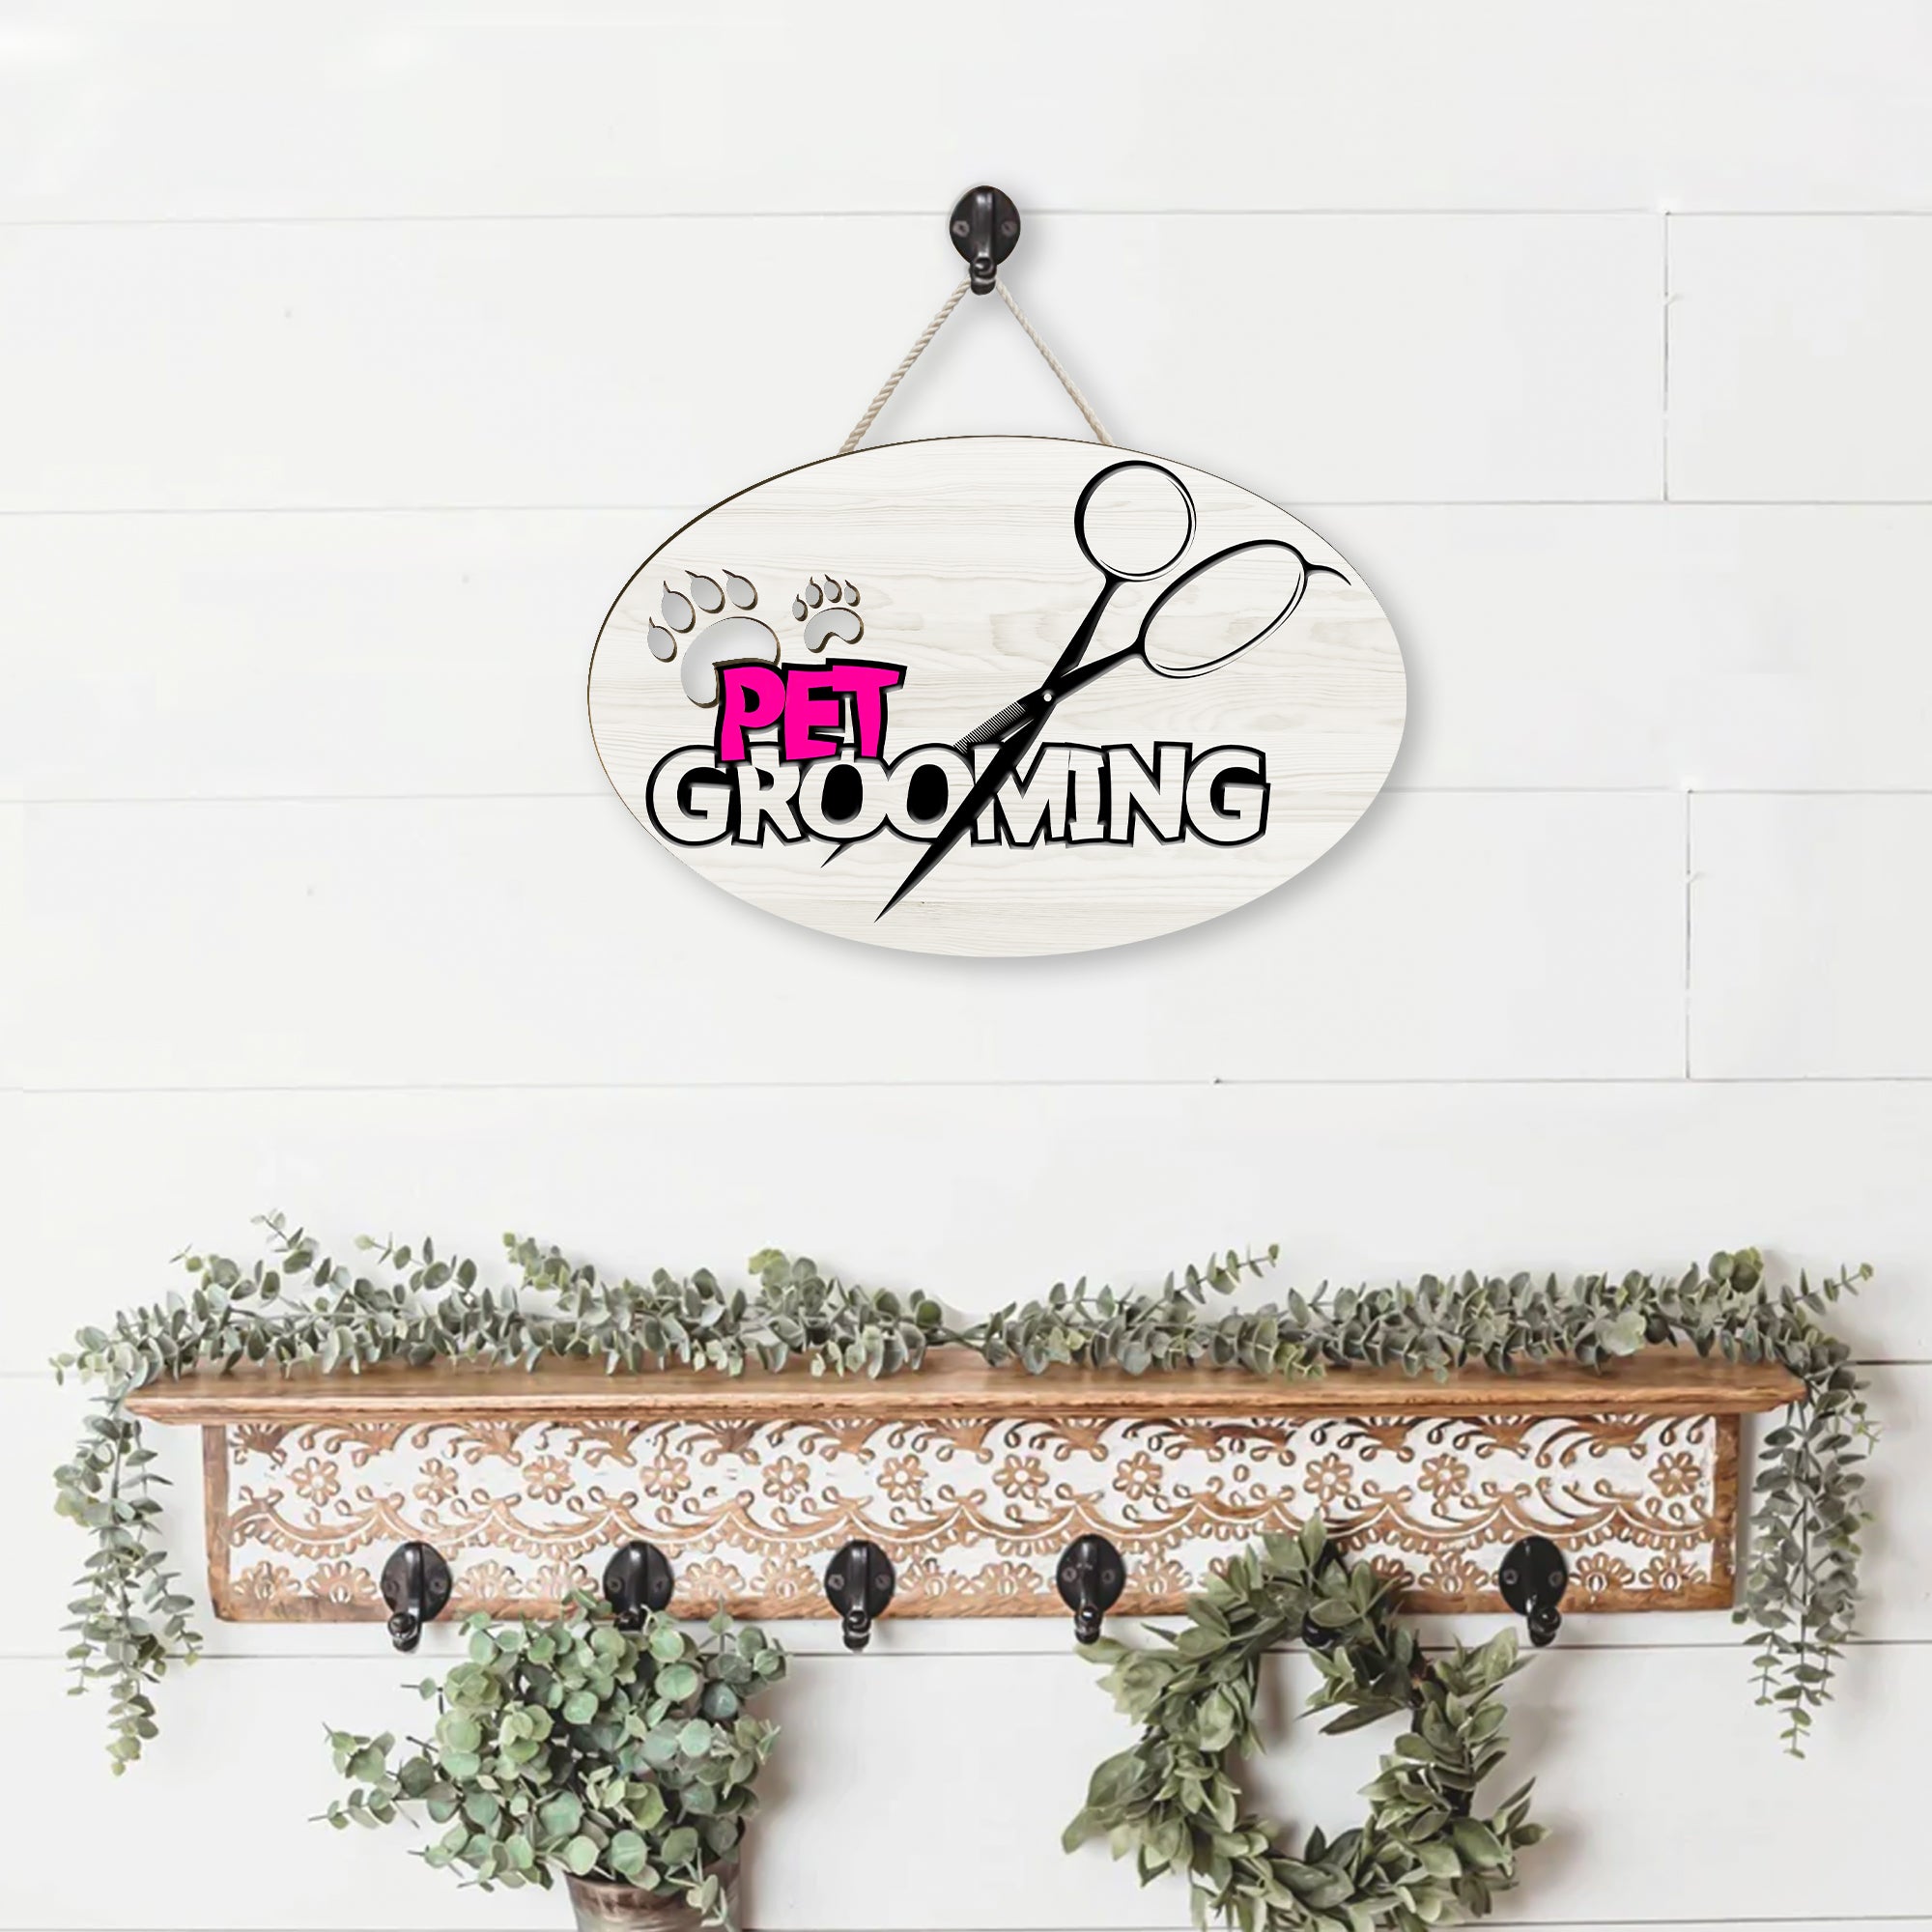 PET GROOMING WOODEN SIGN- CUSTOM SHAPED WOODEN SIGN